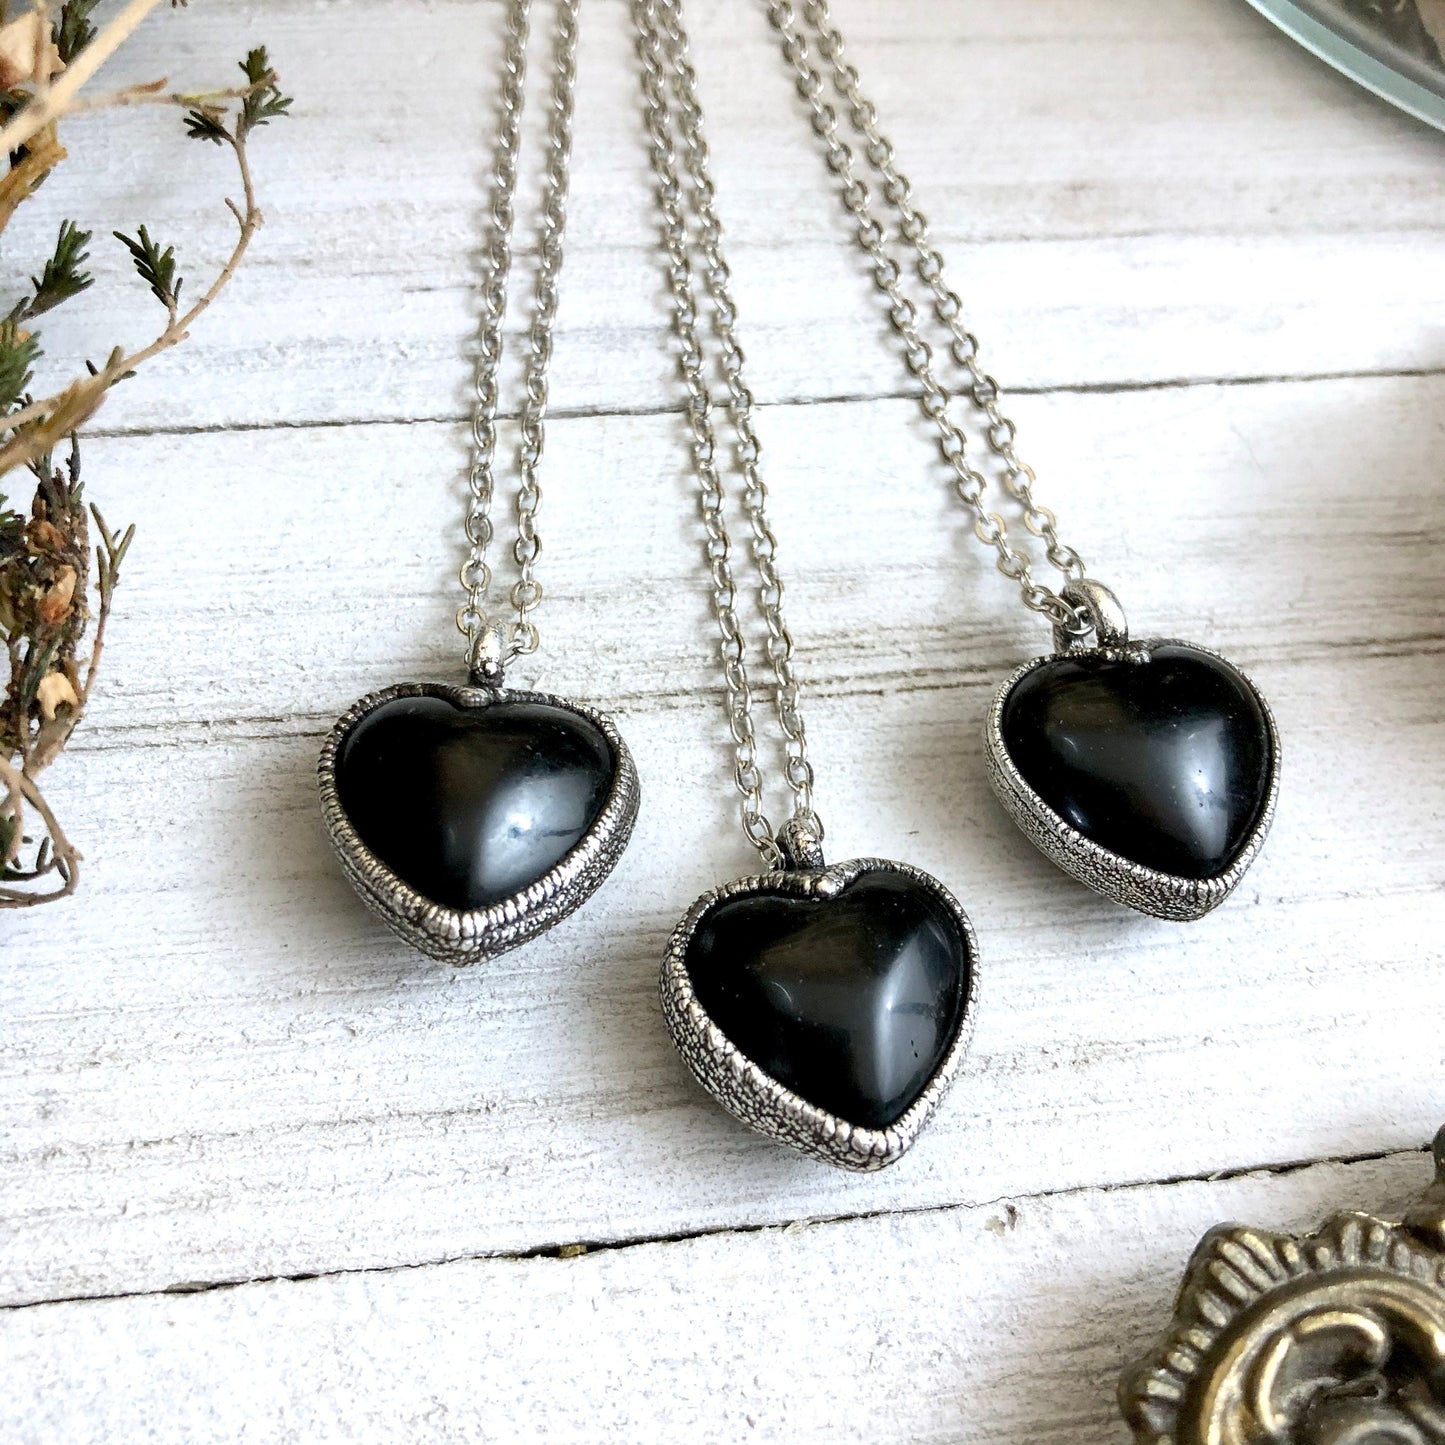 Black Crystal Heart, Black Stone Necklace, Bohemian Jewelry, Crystal heart, Crystal Necklace, Crystal Necklaces, Etsy ID: 760153511, FOXLARK- NECKLACES, Gothic Jewelry, Healing Crystal, Heart Necklace, Heart Pendant, Jewelry, Necklaces, Obsidian Heart, Ob